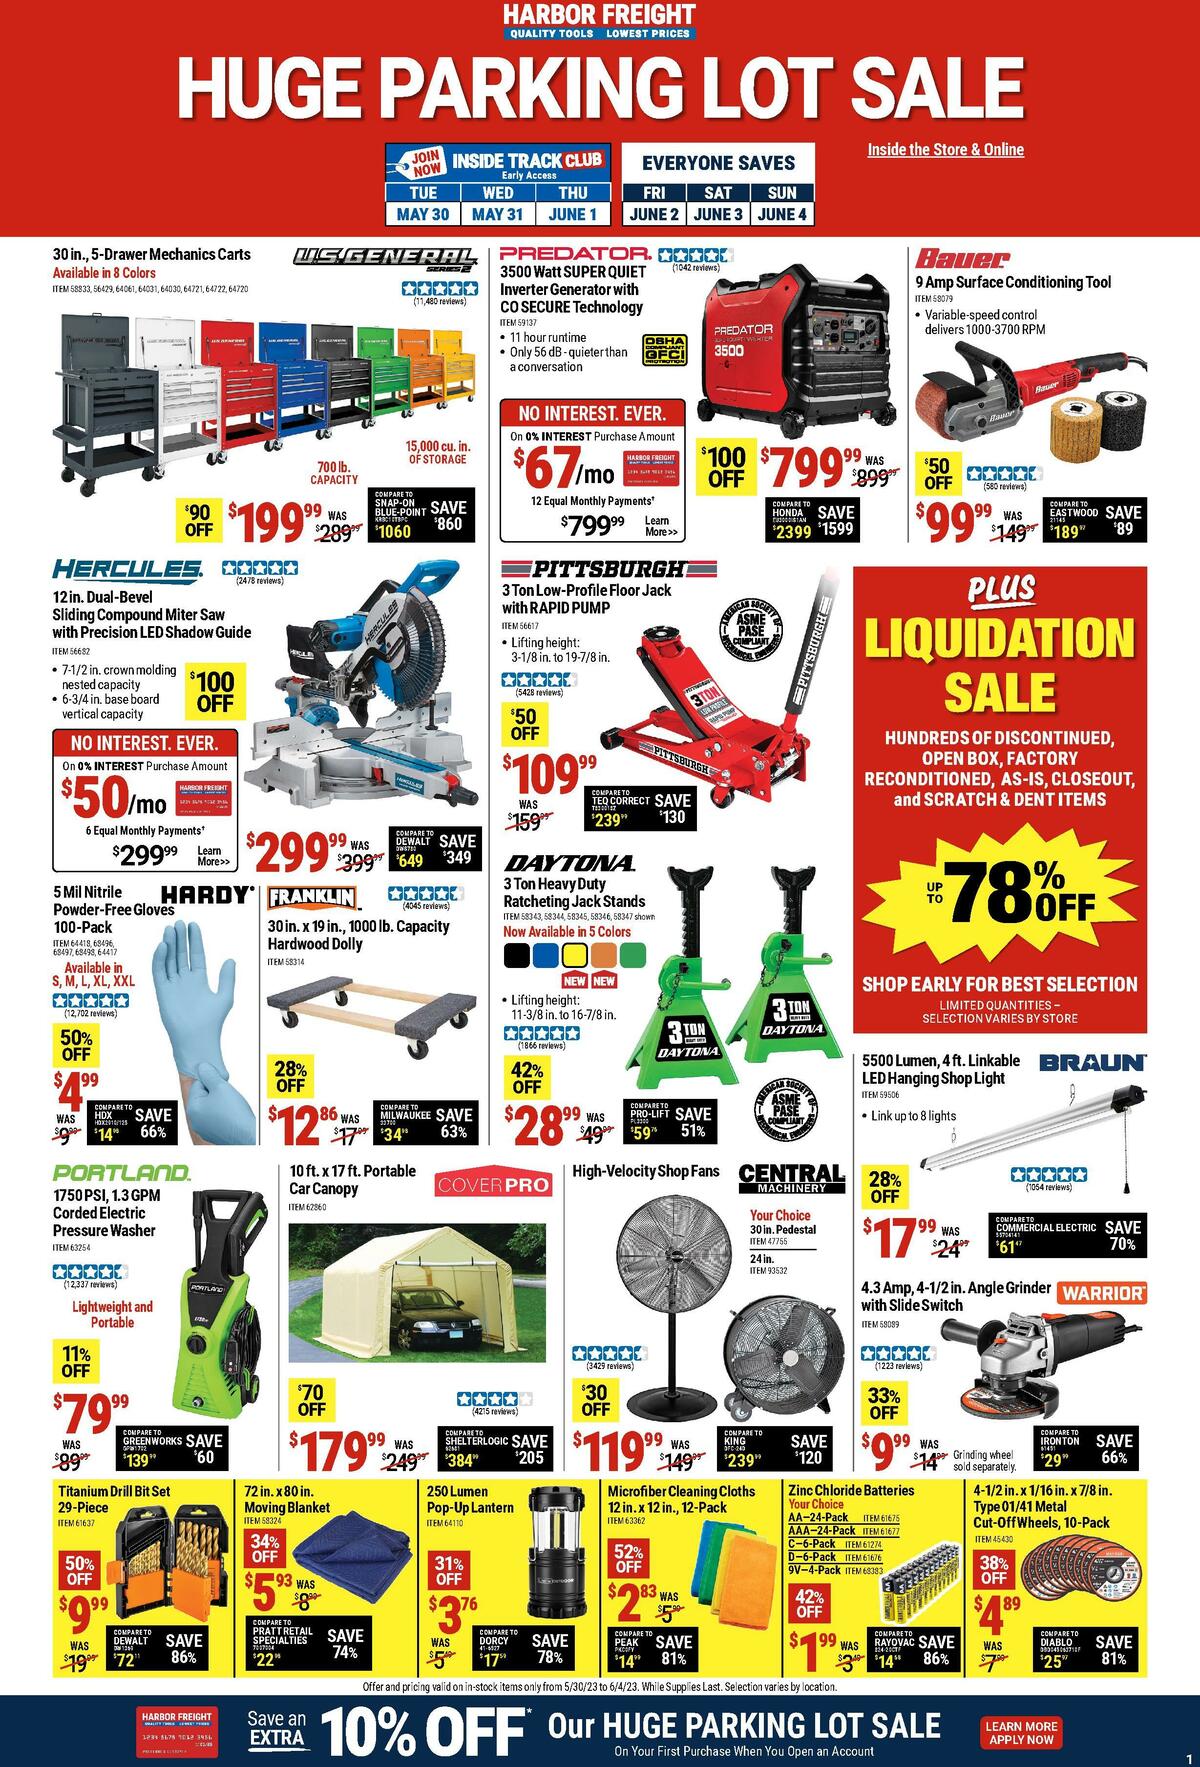 Harbor Freight Tools Best Offers & Special Buys from May 30